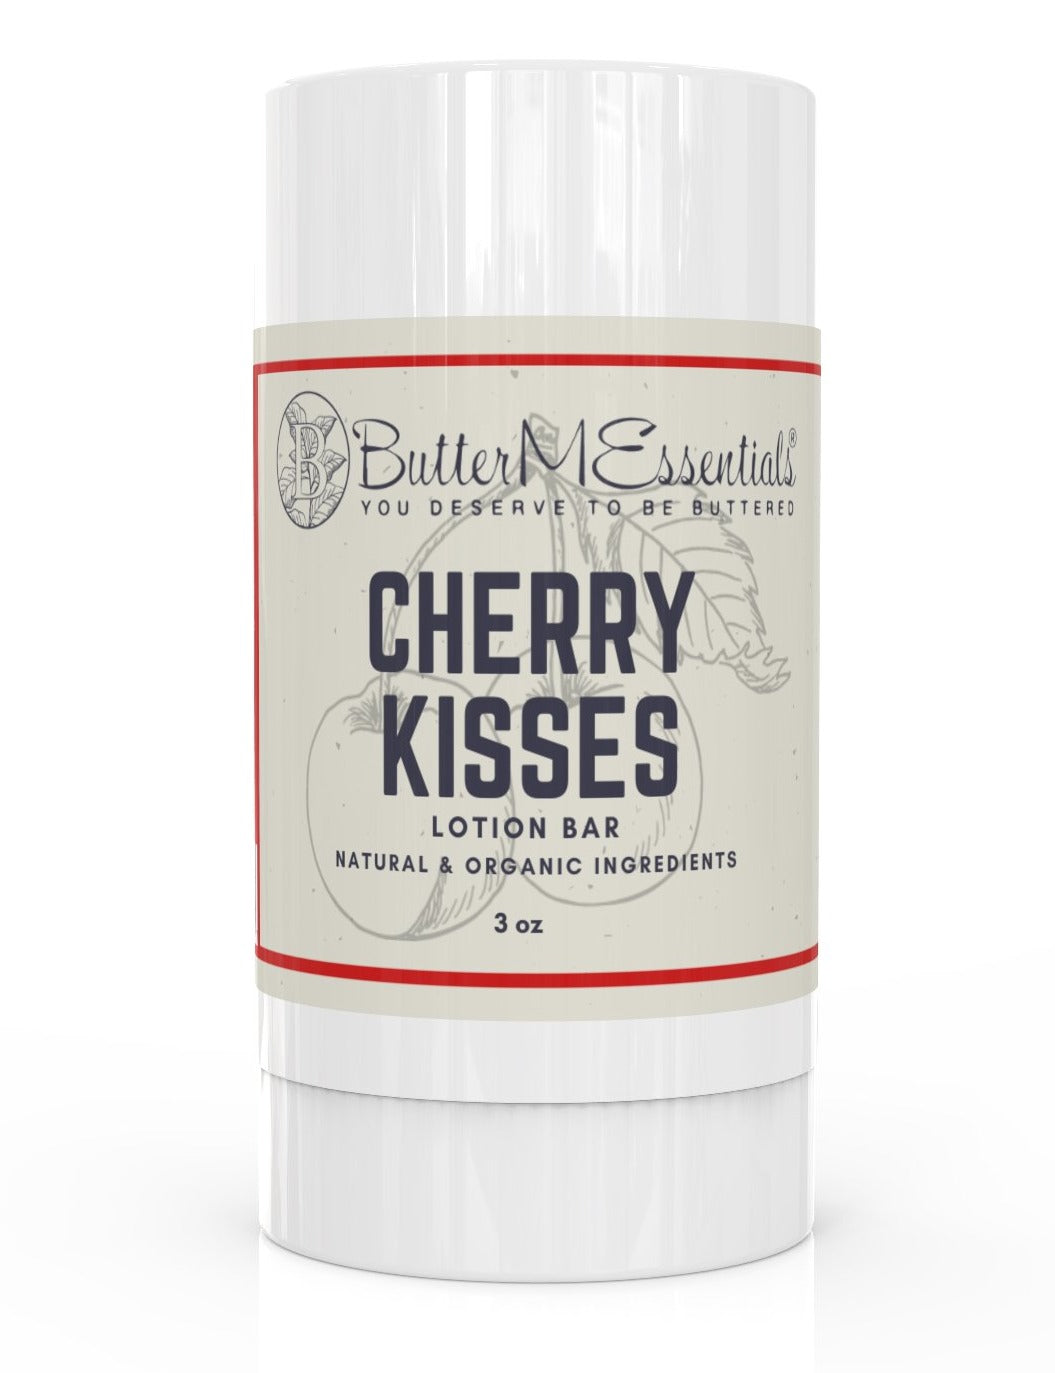 Cherry Kisses Lotion Bar in Tubes